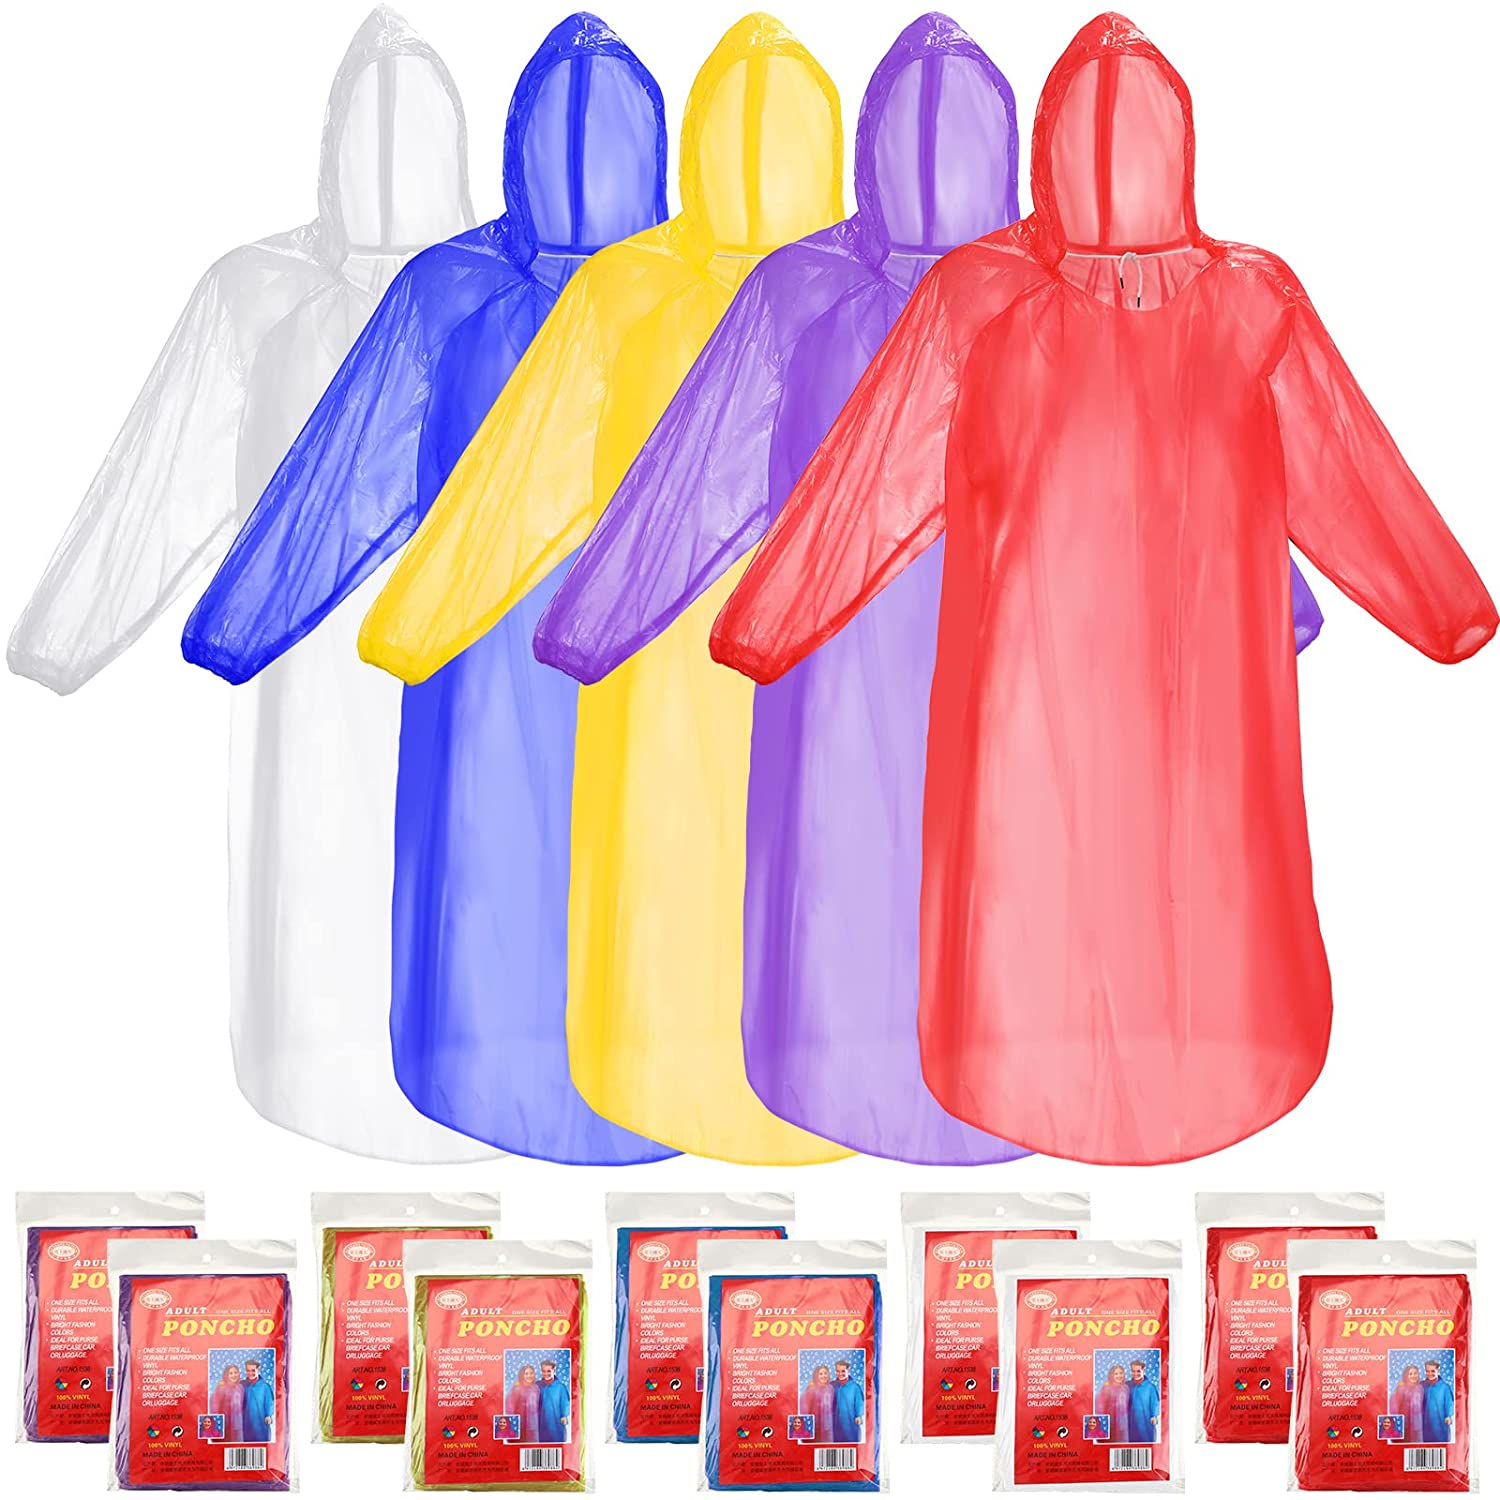 Coume 40 Pack Rain Poncho Family Emergency Ponchos Disposable Waterproof Drawstring Hood Clear Survival Raincoat for Women Men Adult Kid, 5 Colors, approx. 50 x inches